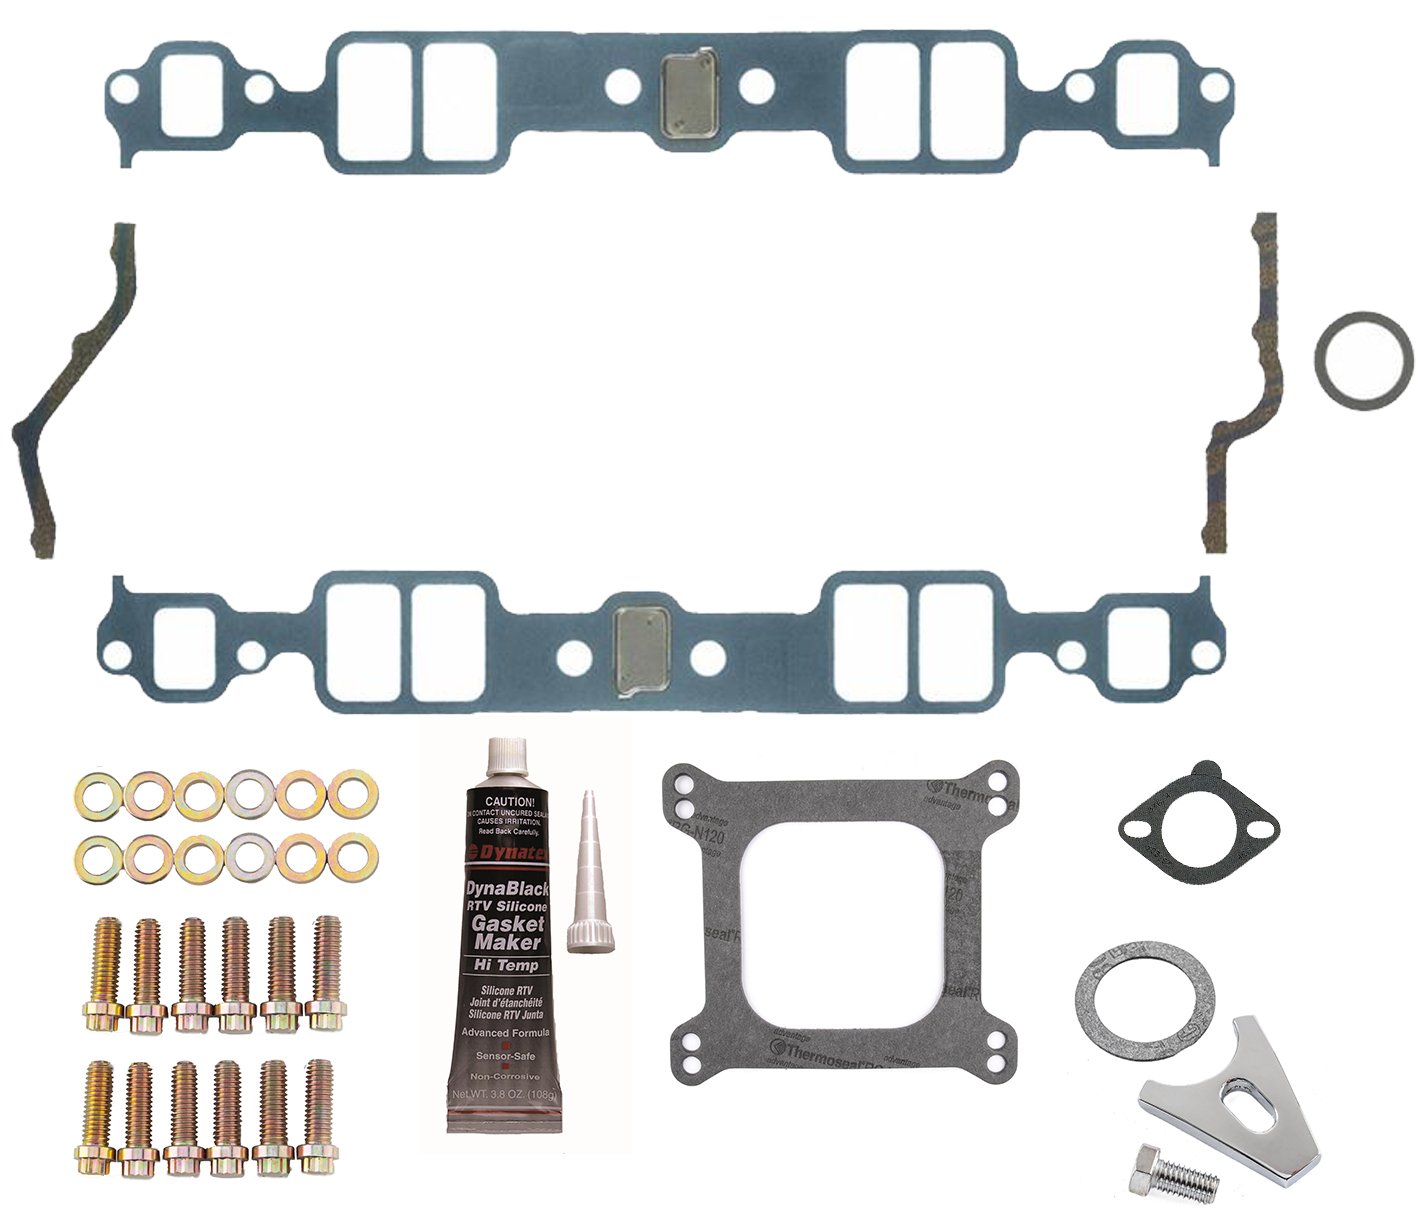 H/P Intake Gasket Install Kit - Small Block Chevy 262-400 V8 Engines - Stock Port